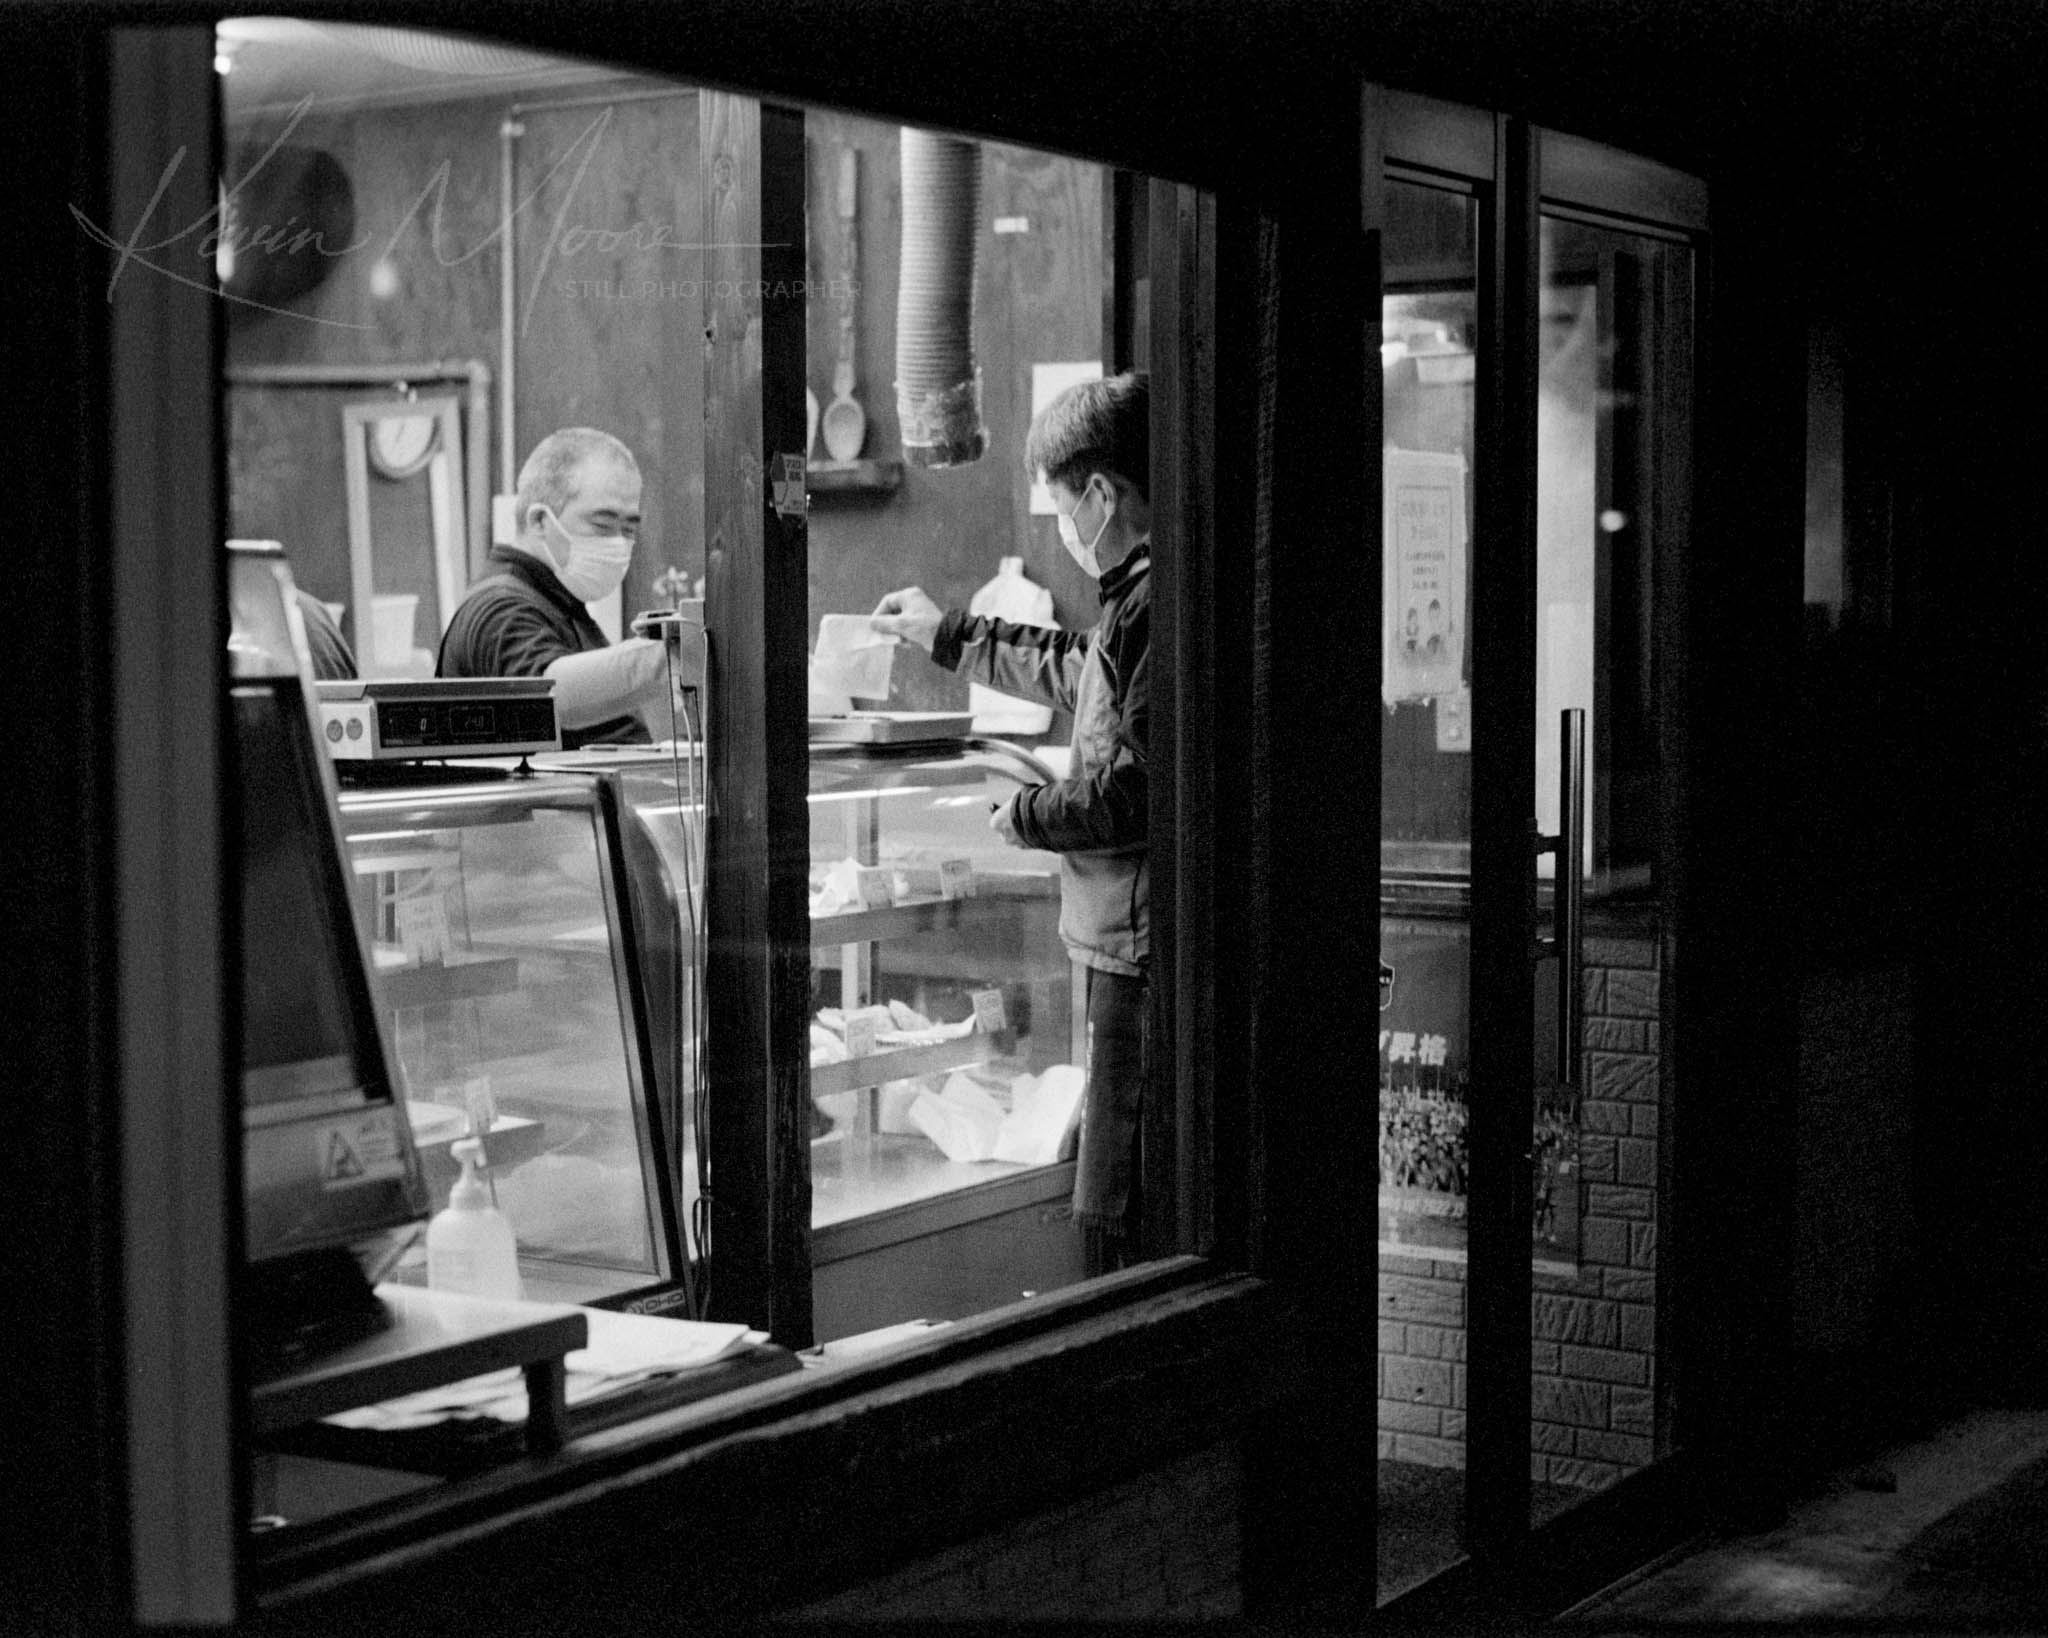 Black-and-white image of a timeless, friendly exchange in a local nighttime shop.